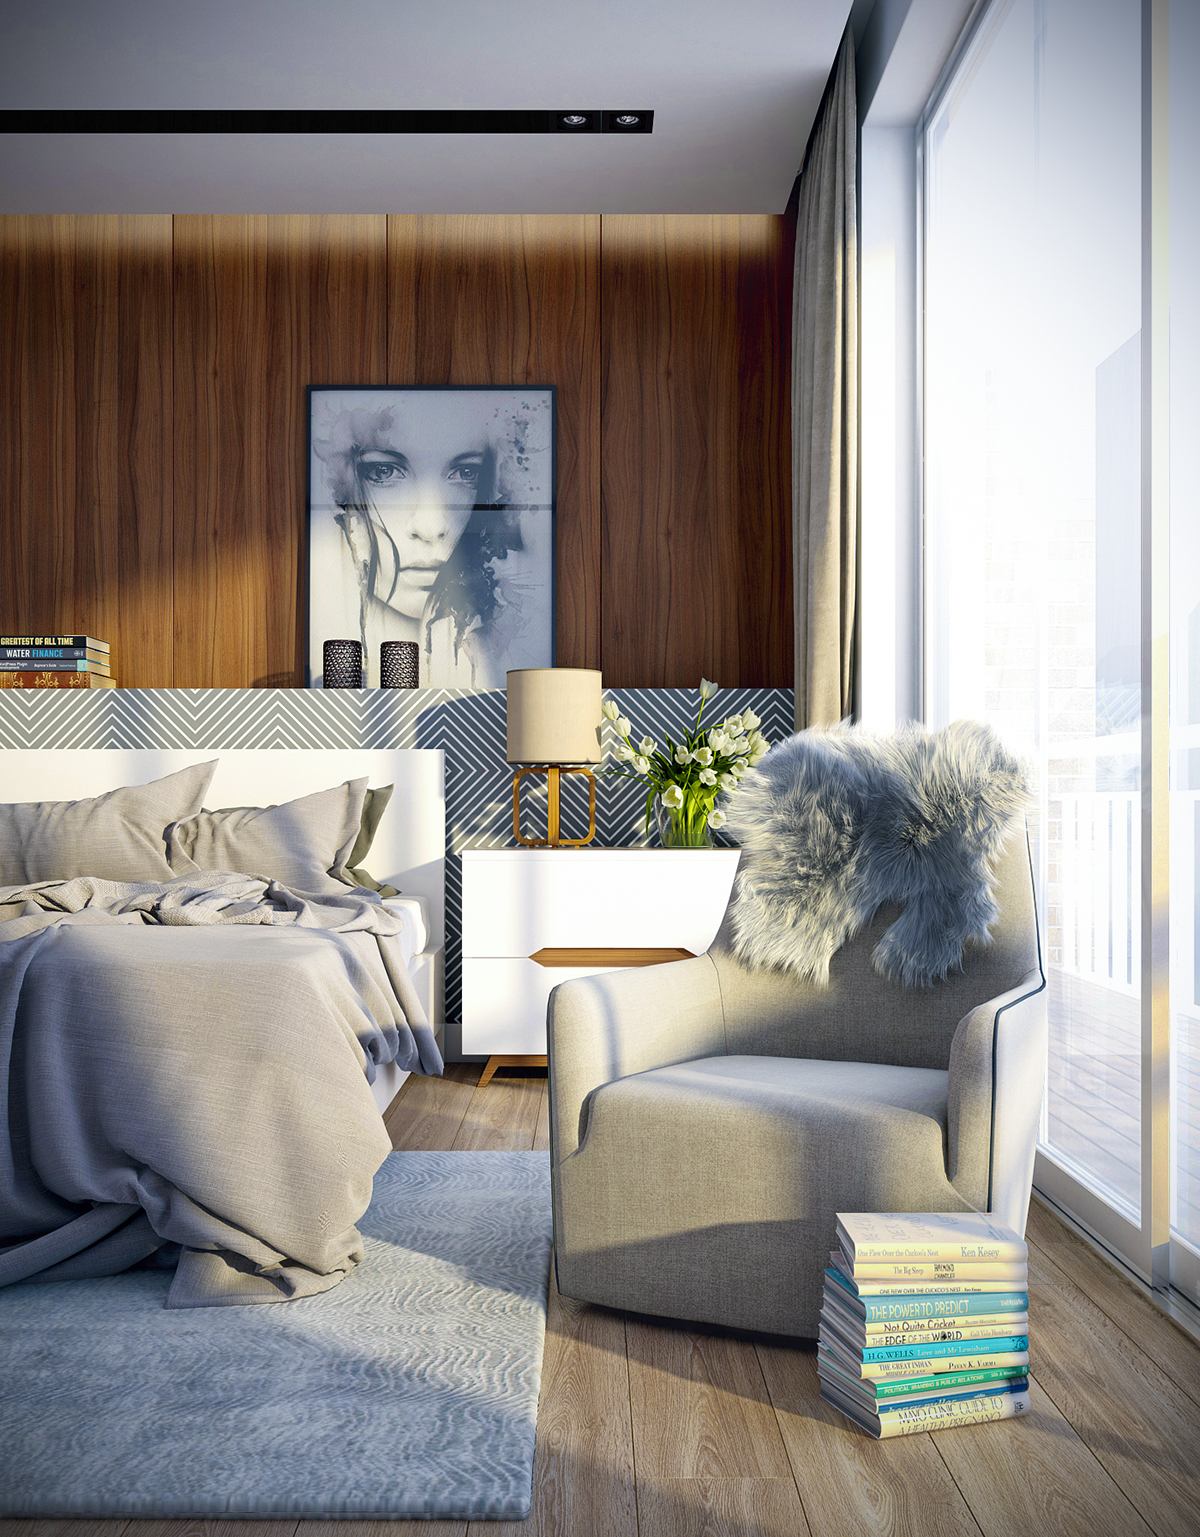 Ideas for modern bedroom themes "width =" 1200 "height =" 1537 "srcset =" https://mileray.com/wp-content/uploads/2020/05/1588510626_110_7-The-Best-Bedroom-Theme-With-Creative-Wood-Wall-Decoration.jpg 1200w, https: // myfashionos .com / wp-content / uploads / 2016/06 / Phan-Nguyen-1-234x300.jpg 234w, https://mileray.com/wp-content/uploads/2016/06/Phan-Nguyen-1-768x984. jpg 768w, https://mileray.com/wp-content/uploads/2016/06/Phan-Nguyen-1-799x1024.jpg 799w, https://mileray.com/wp-content/uploads/2016/06/ Phan-Nguyen-1-696x891.jpg 696w, https://mileray.com/wp-content/uploads/2016/06/Phan-Nguyen-1-1068x1368.jpg 1068w, https://mileray.com/wp- Content / Uploads / 2016/06 / Phan-Nguyen-1-328x420.jpg 328w "Sizes =" (maximum width: 1200px) 100vw, 1200px